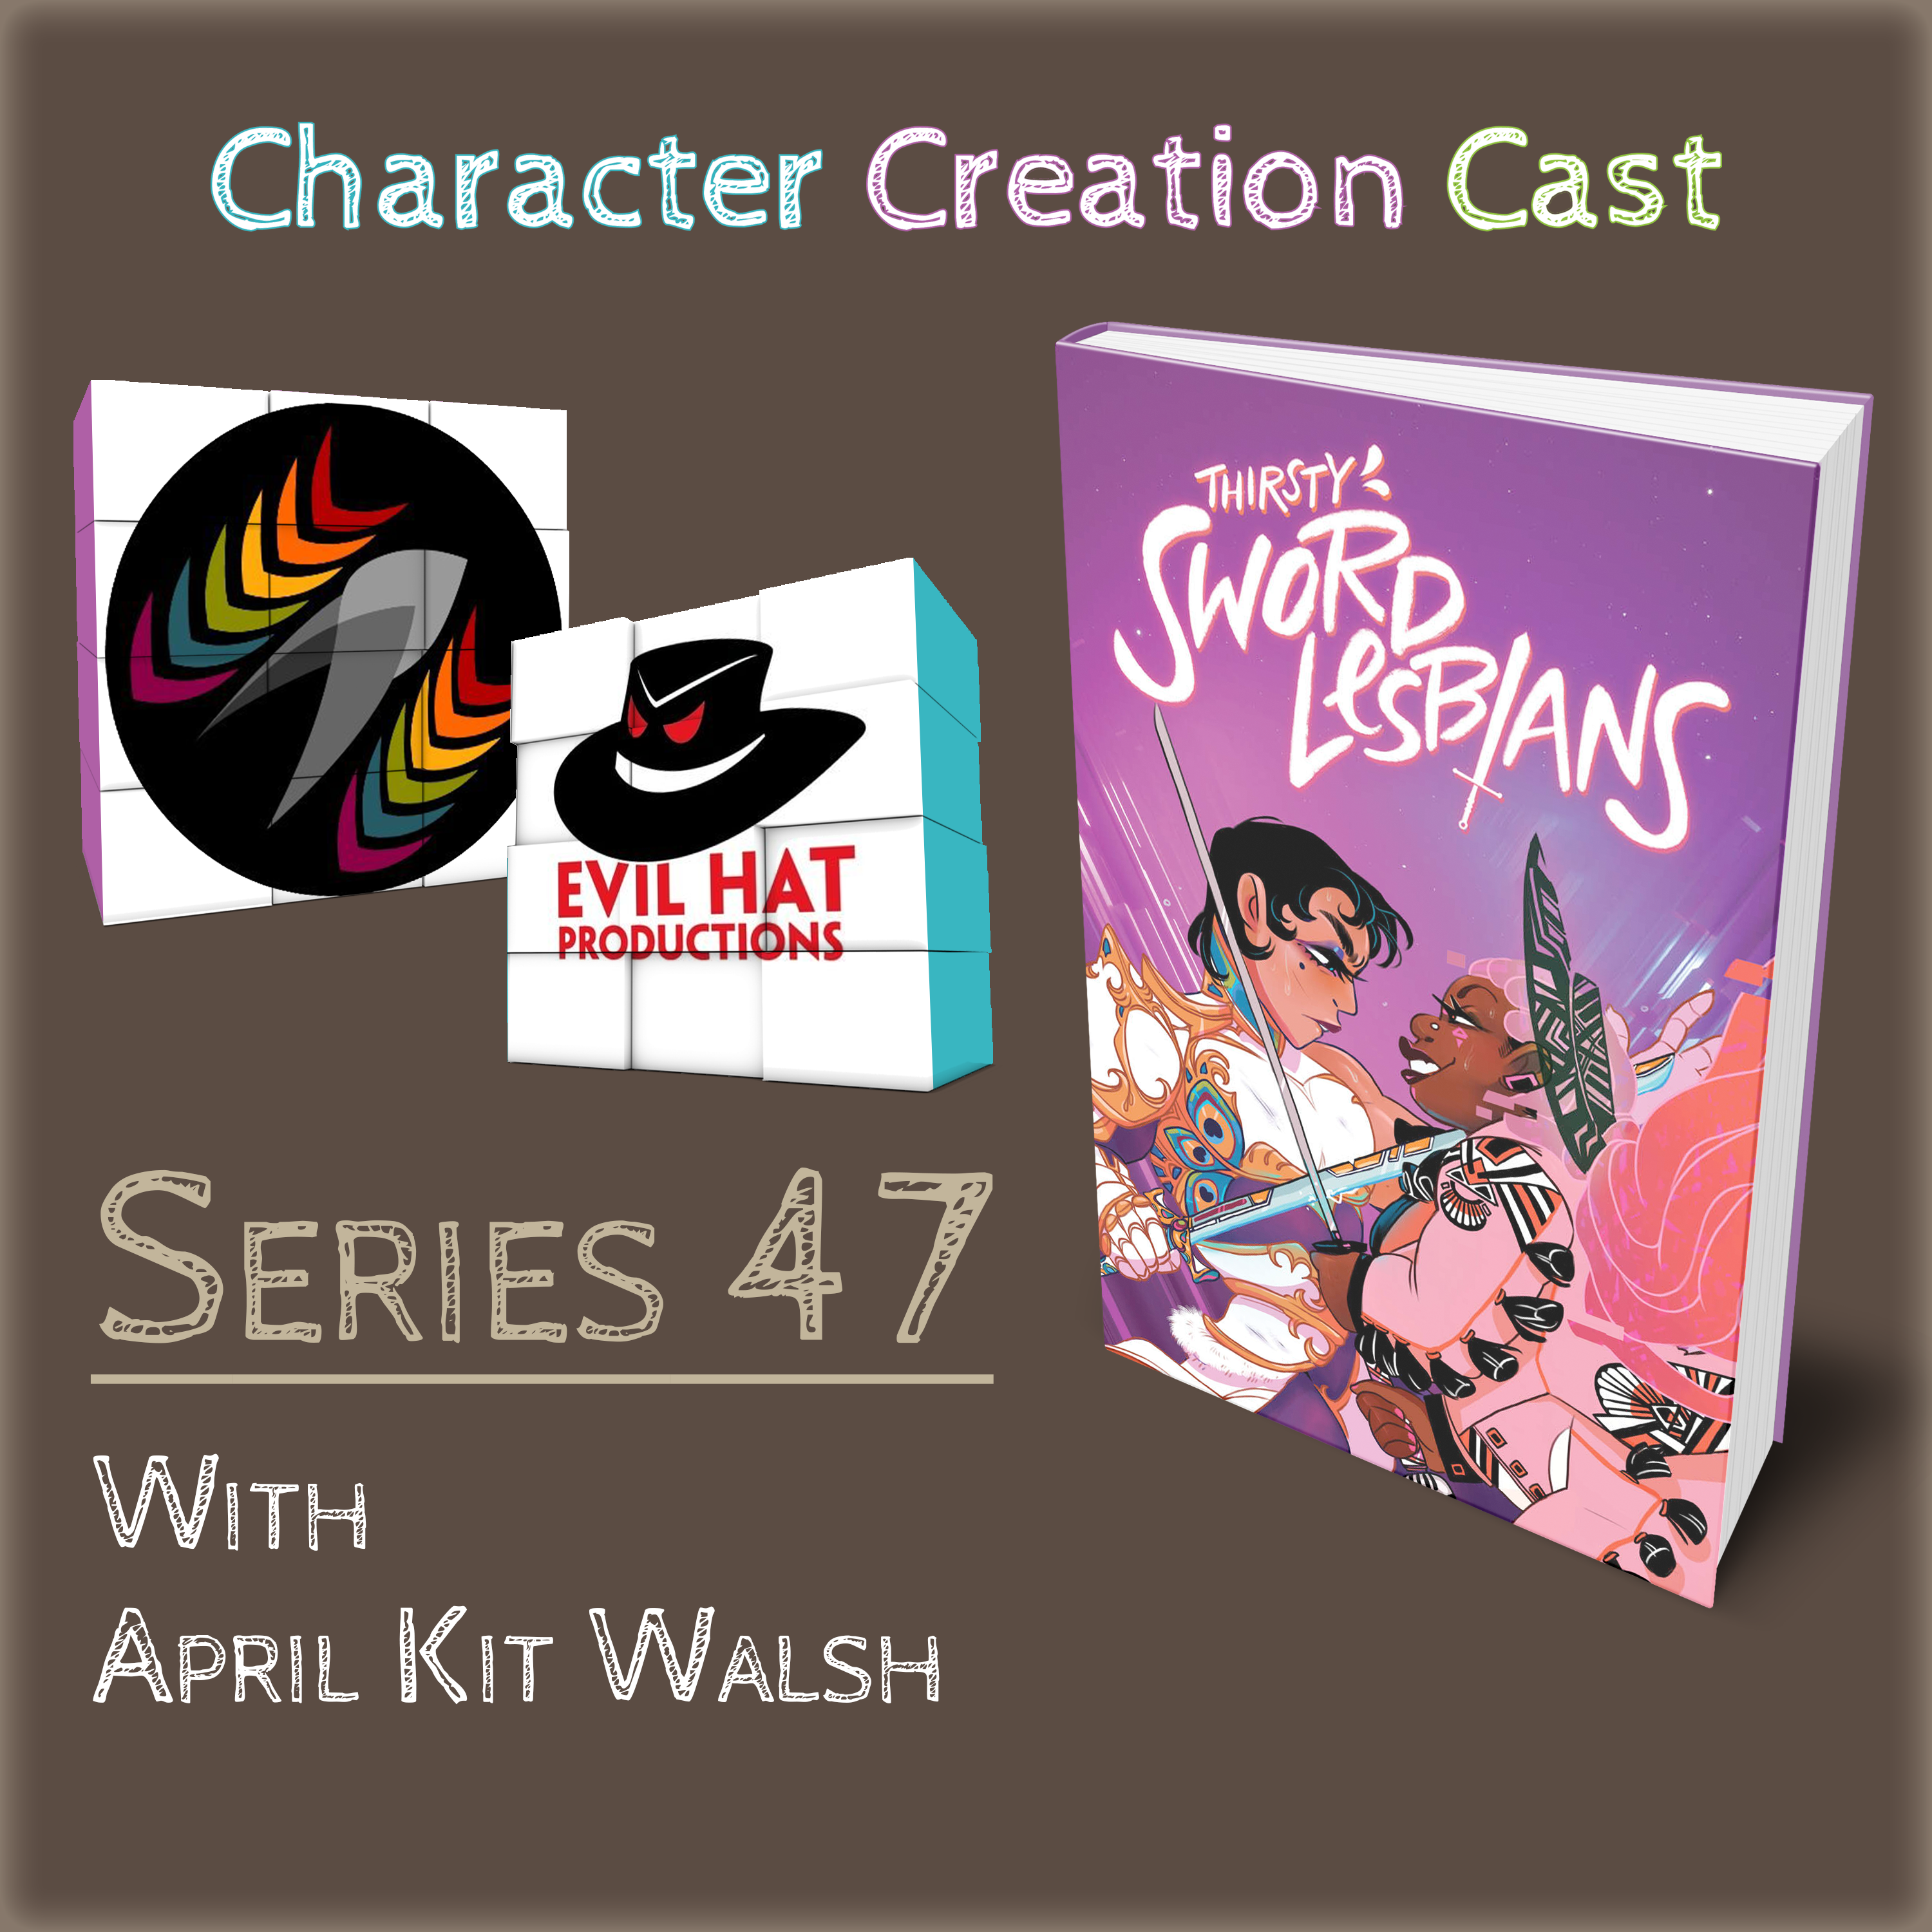 Series 47.1 – Thirsty Sword Lesbians with April Kit Walsh [Designer] (Creation)